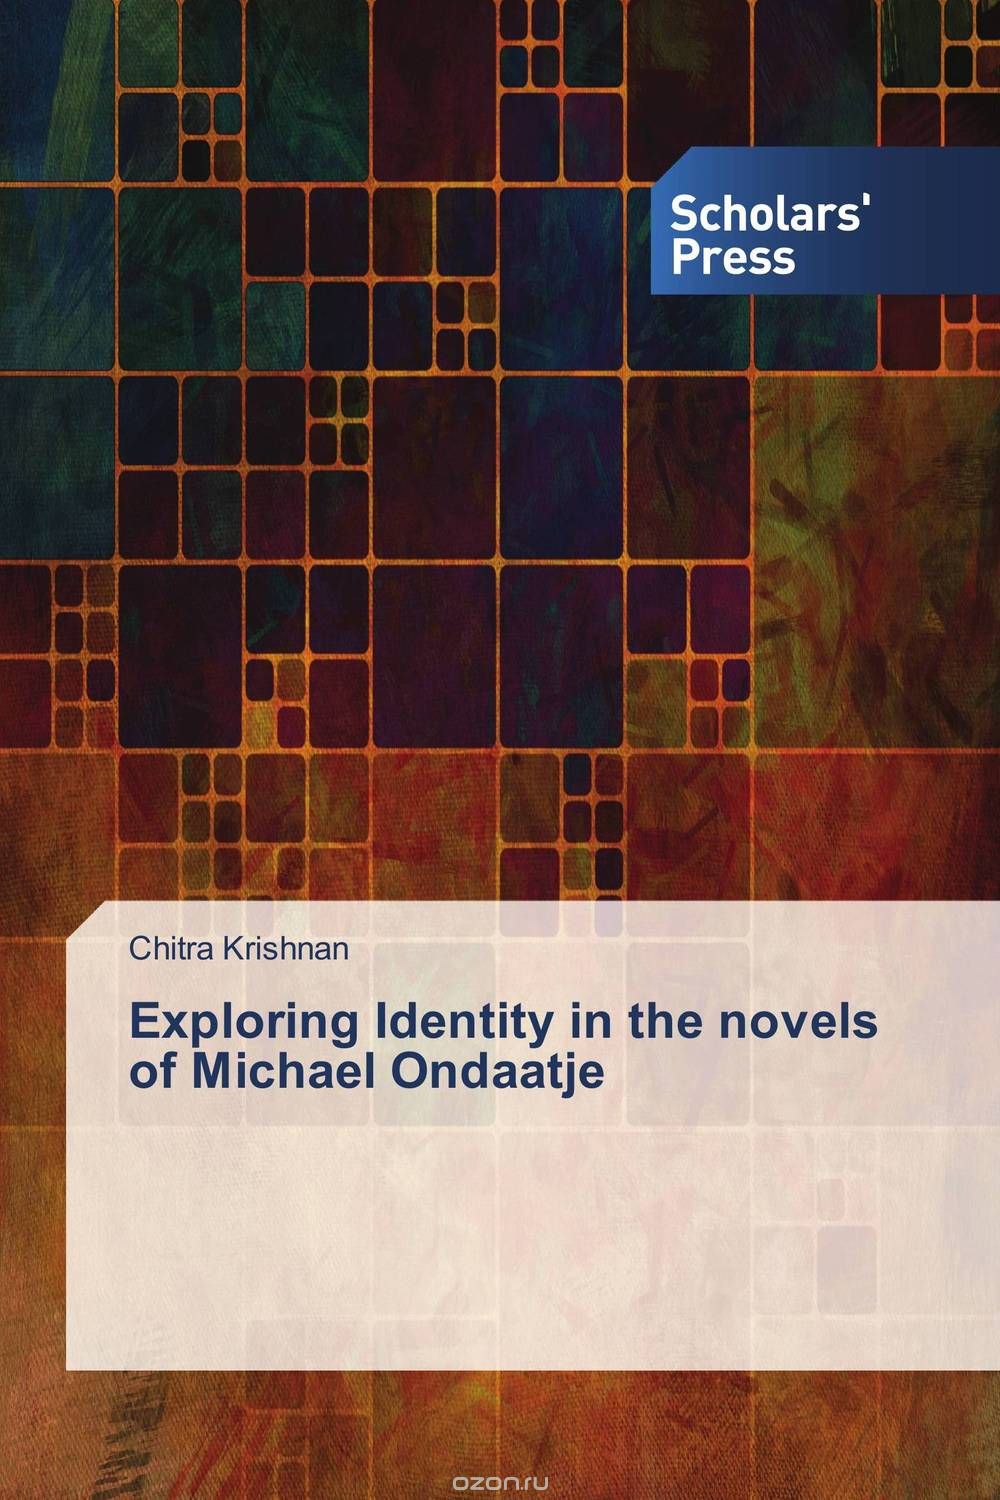 Exploring Identity in the novels of Michael Ondaatje